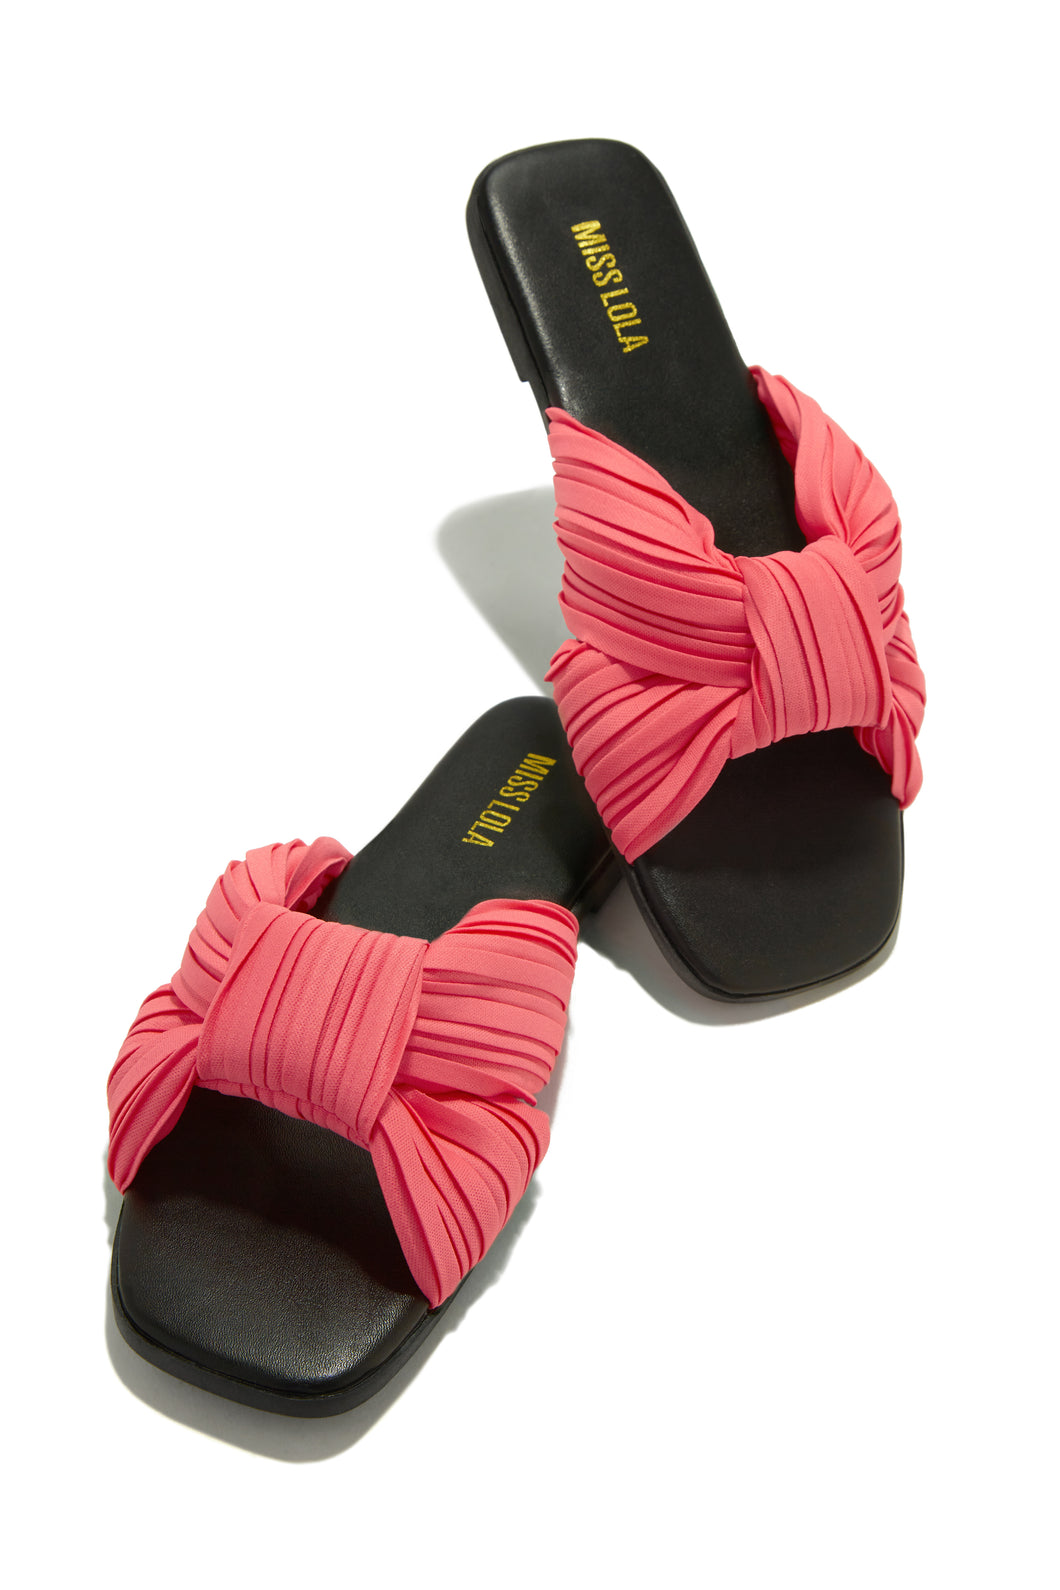 beautiful Pink Sandals for spring and summer outfits